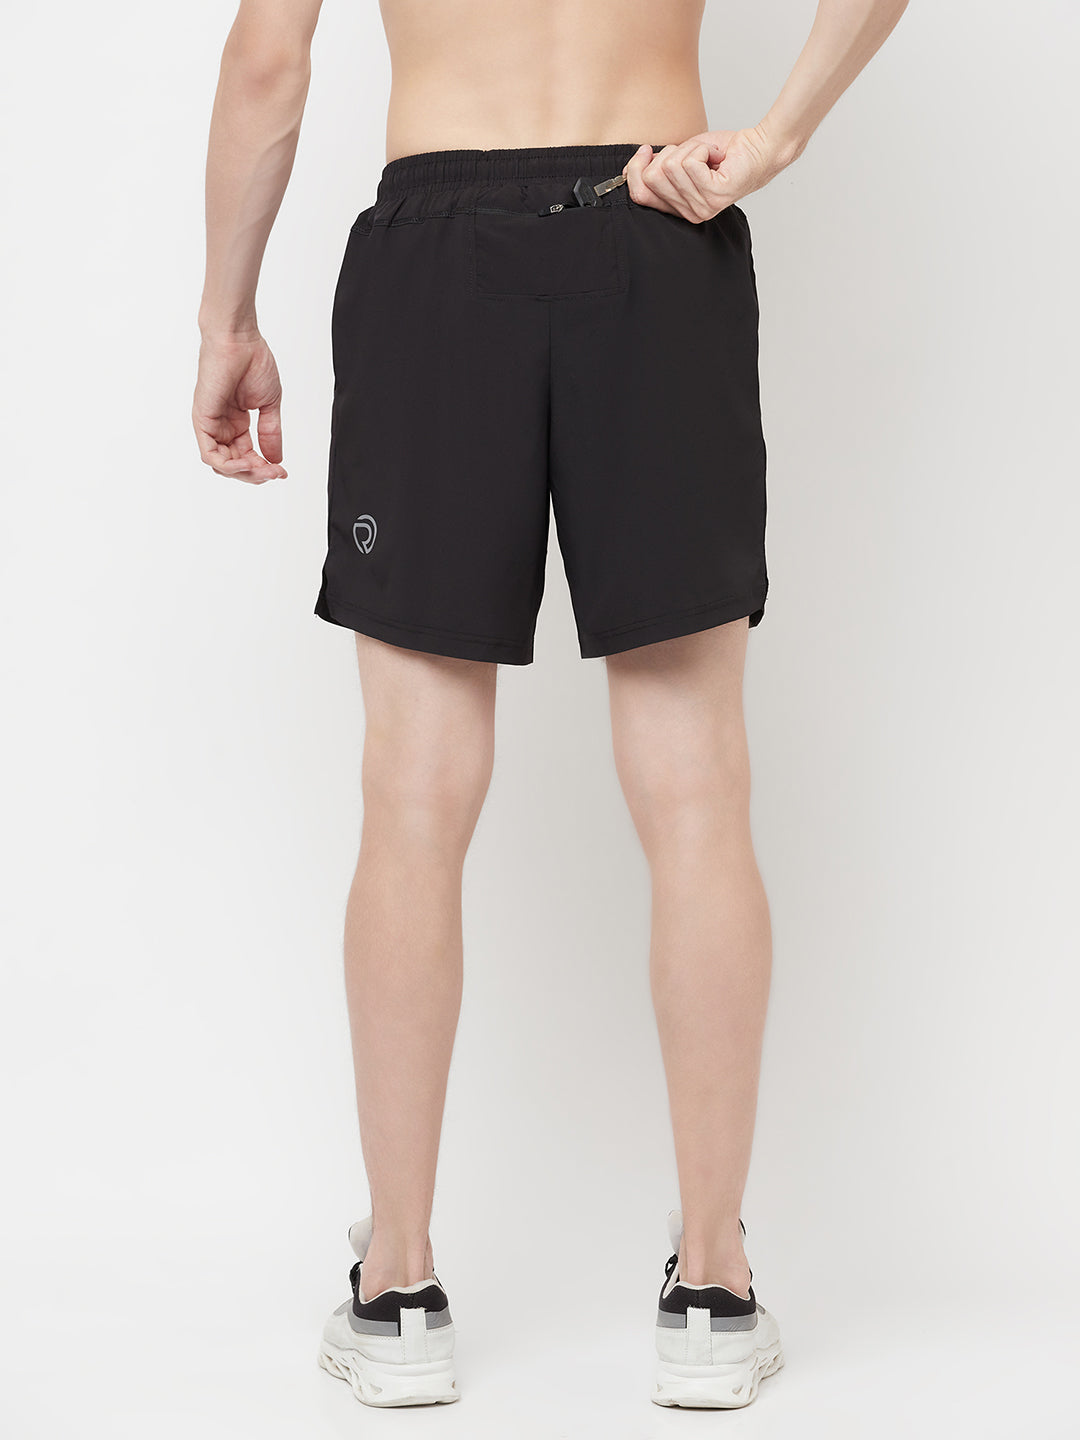 2 pc Combo - 7" 2-in-1 Shorts with Phone Pocket - Black & Light Grey